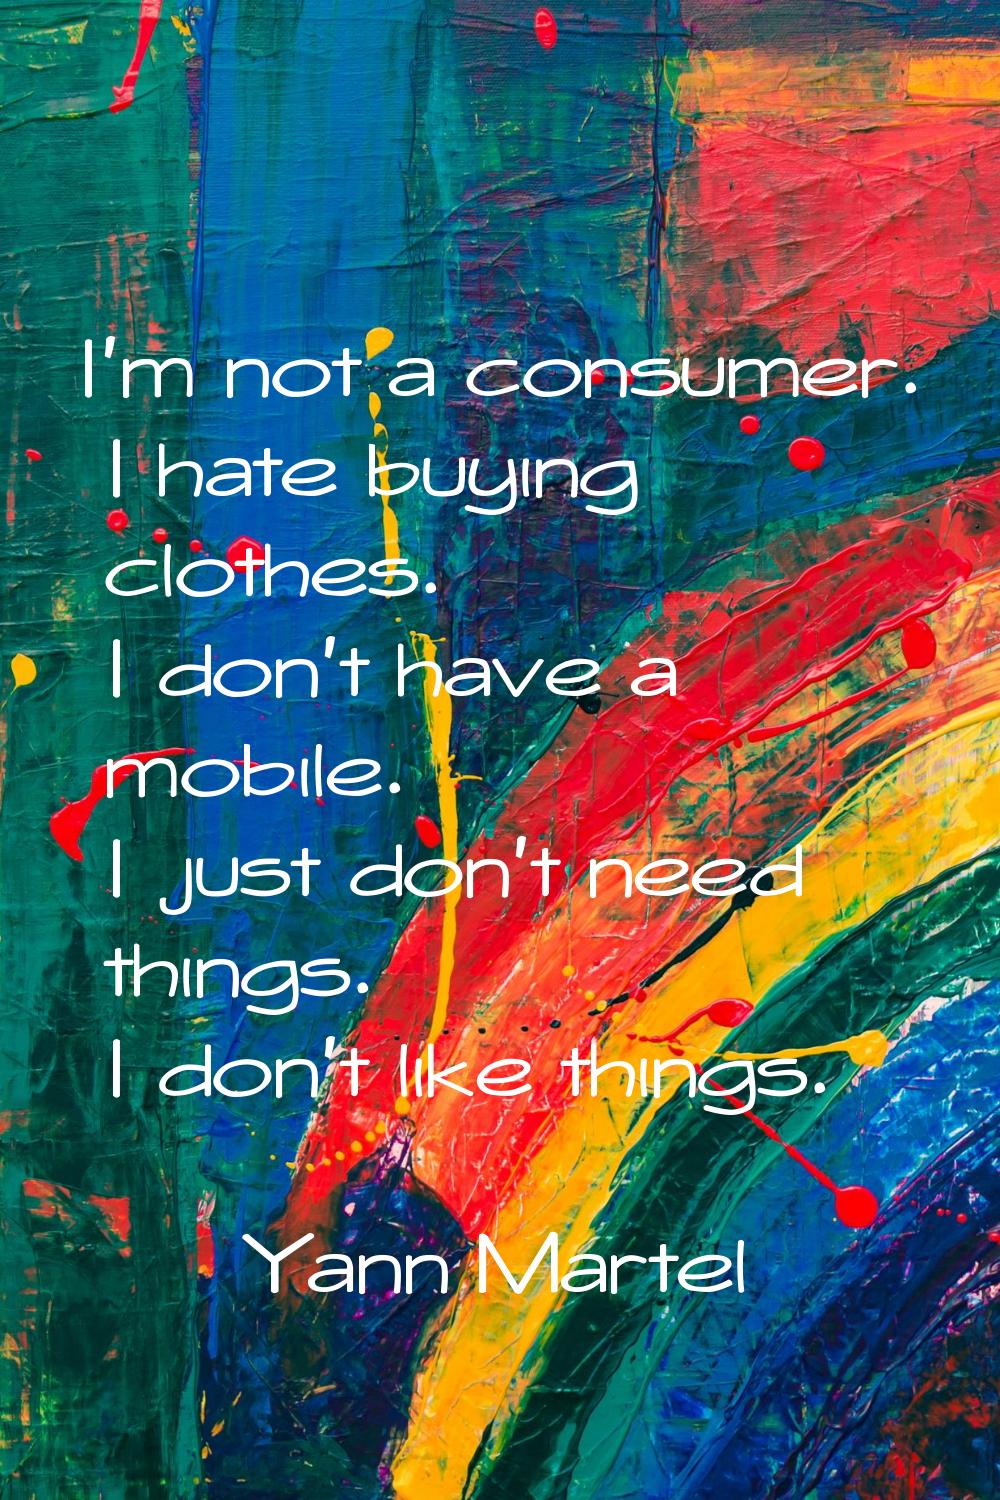 I'm not a consumer. I hate buying clothes. I don't have a mobile. I just don't need things. I don't